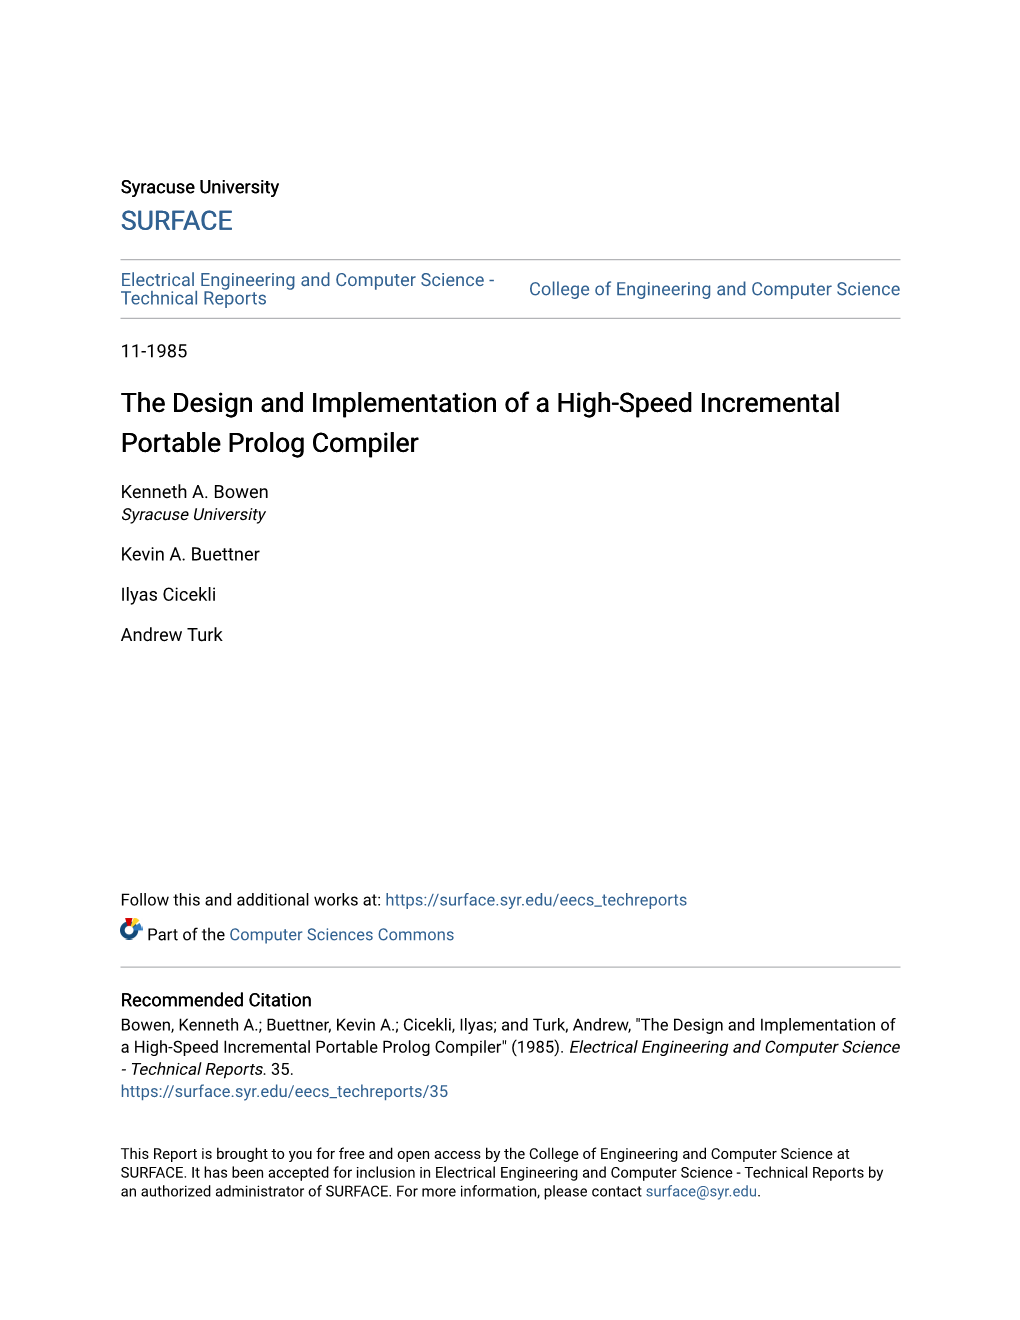 The Design and Implementation of a High-Speed Incremental Portable Prolog Compiler